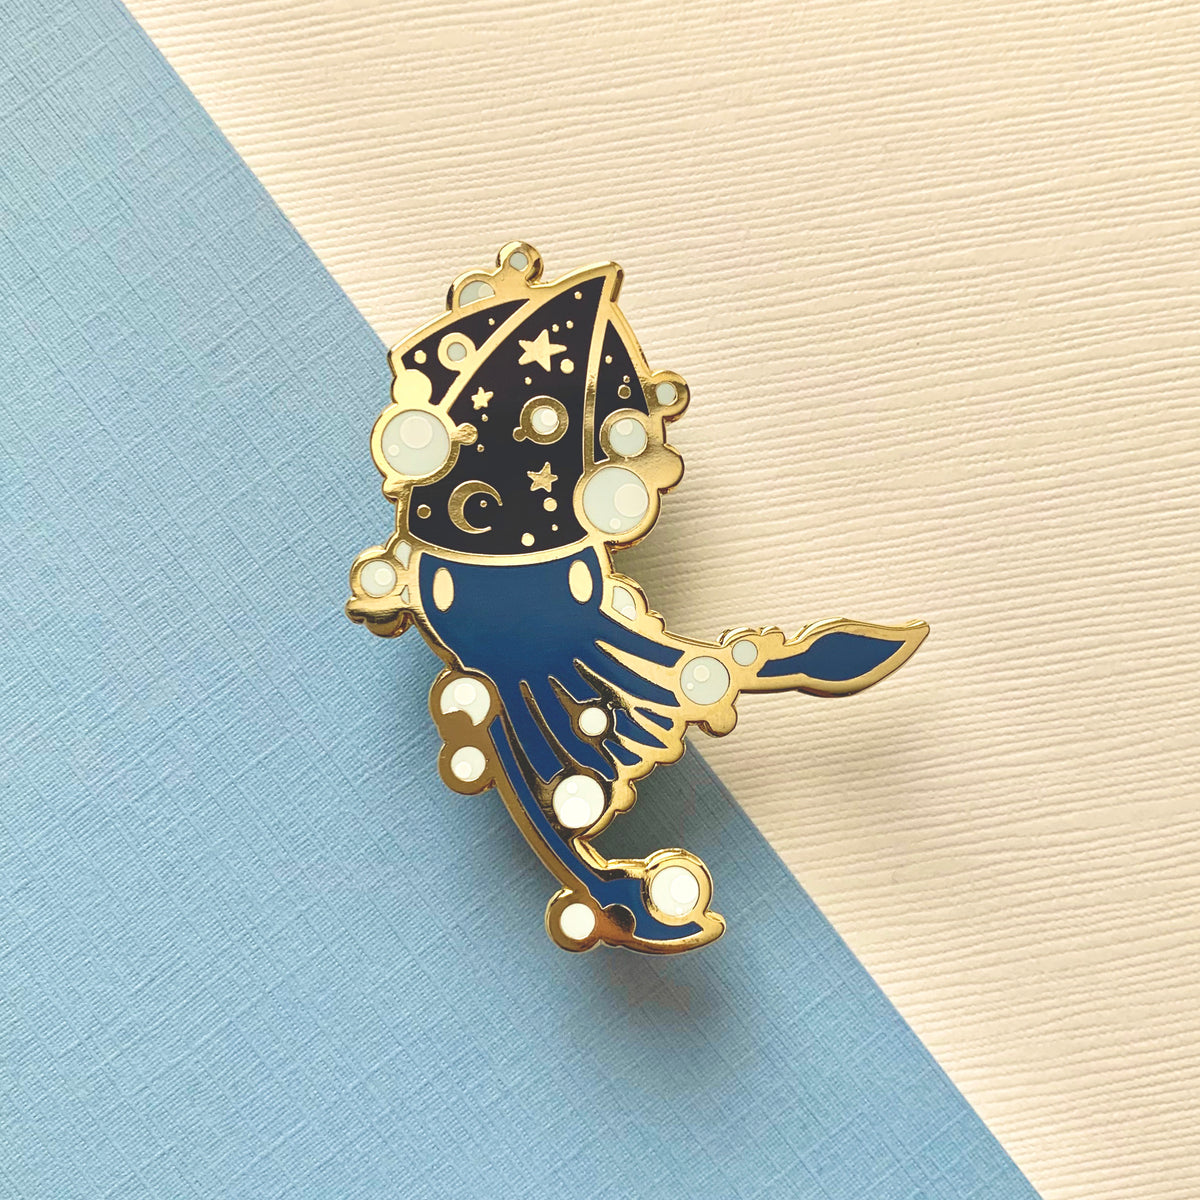 Starry Squid Enamel Pin by Shumi Collective